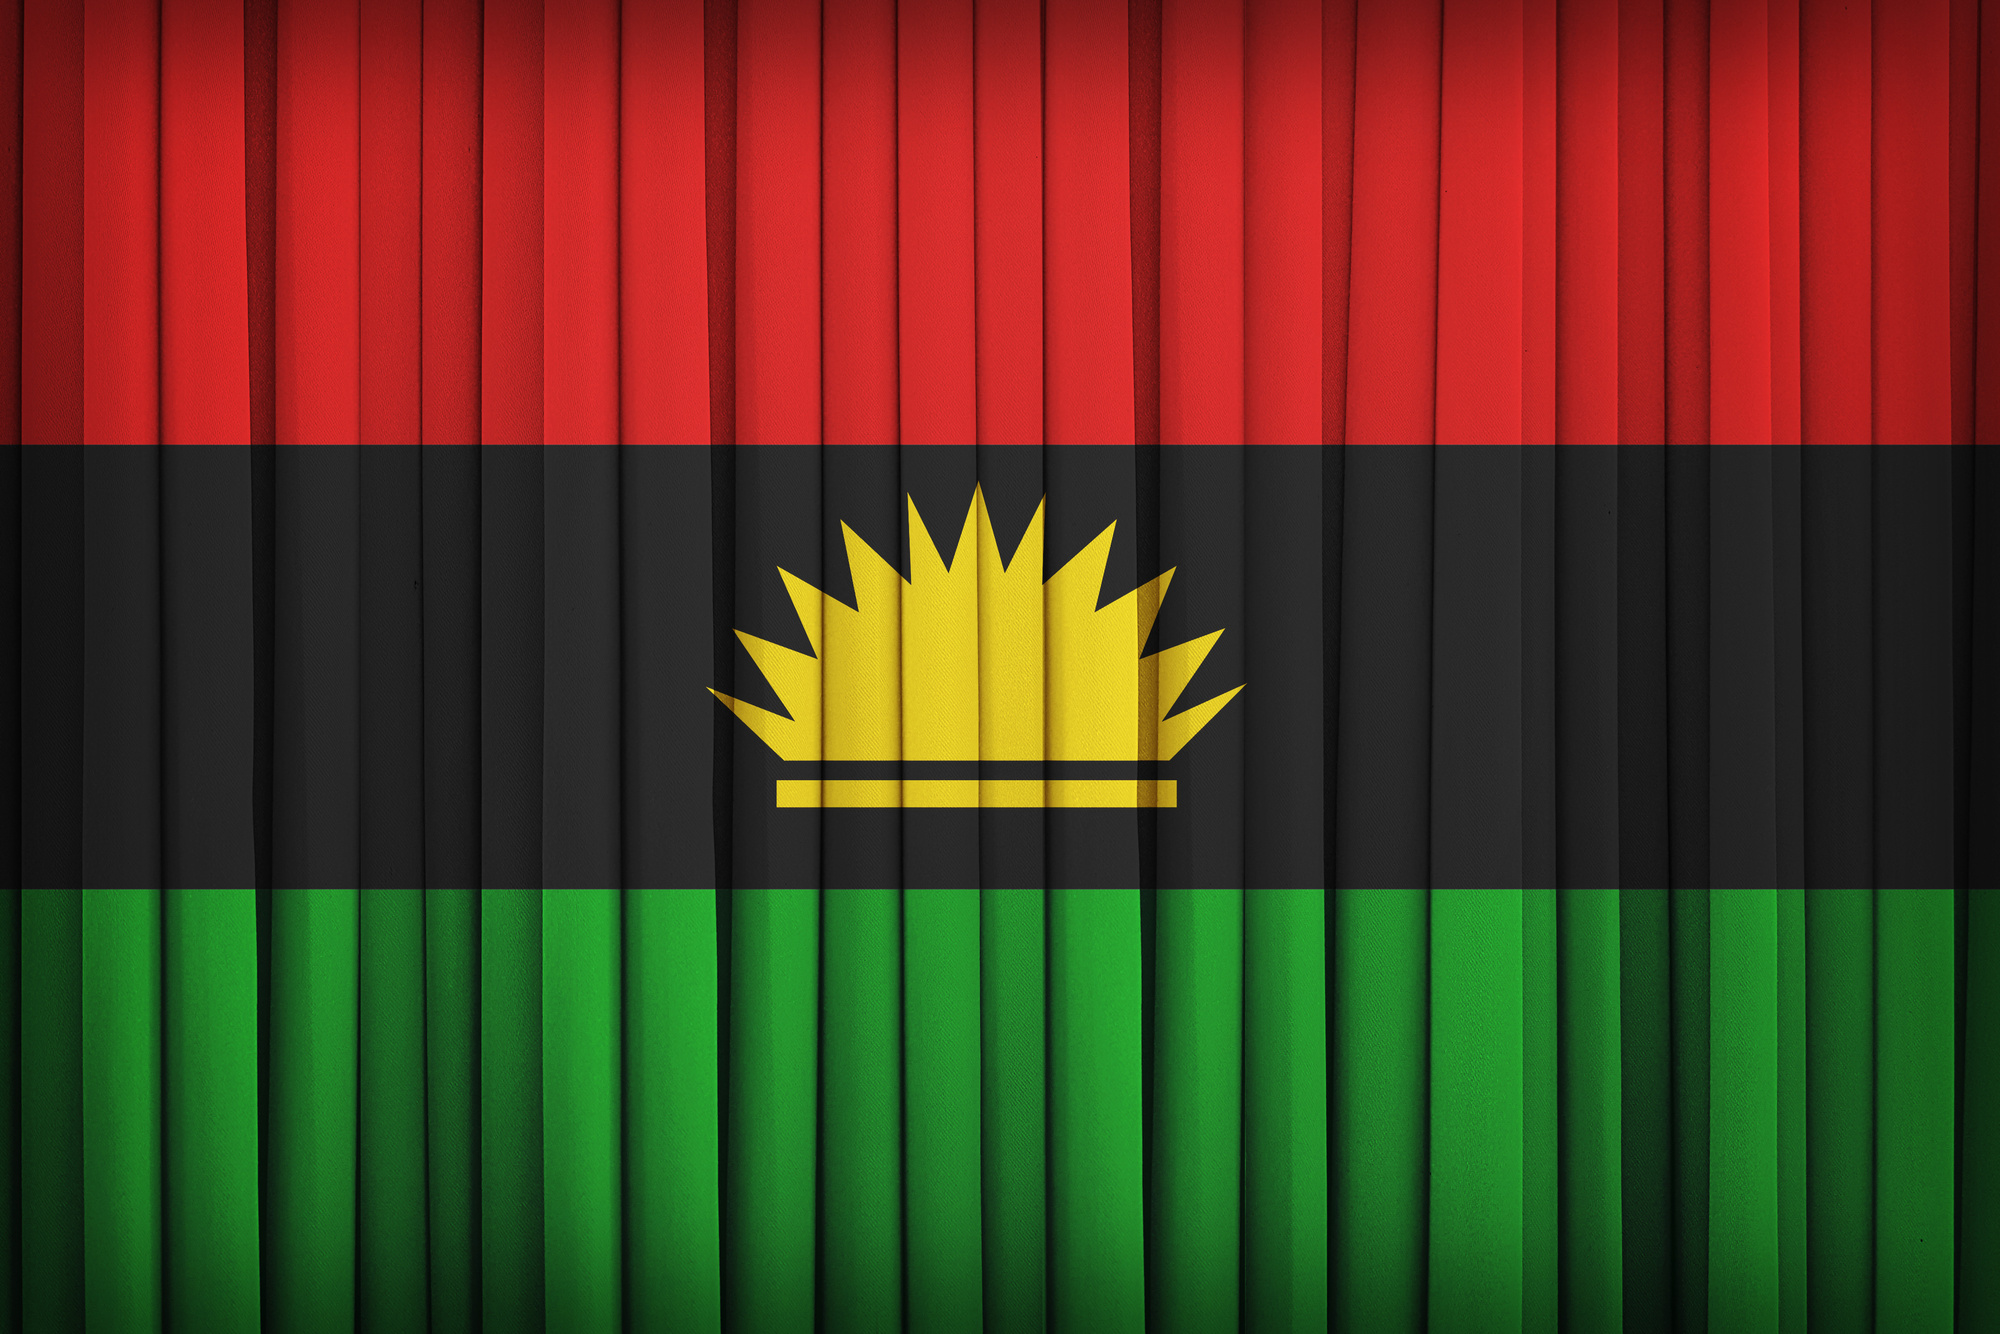 Biafra flag on the fabric curtain,vintage style